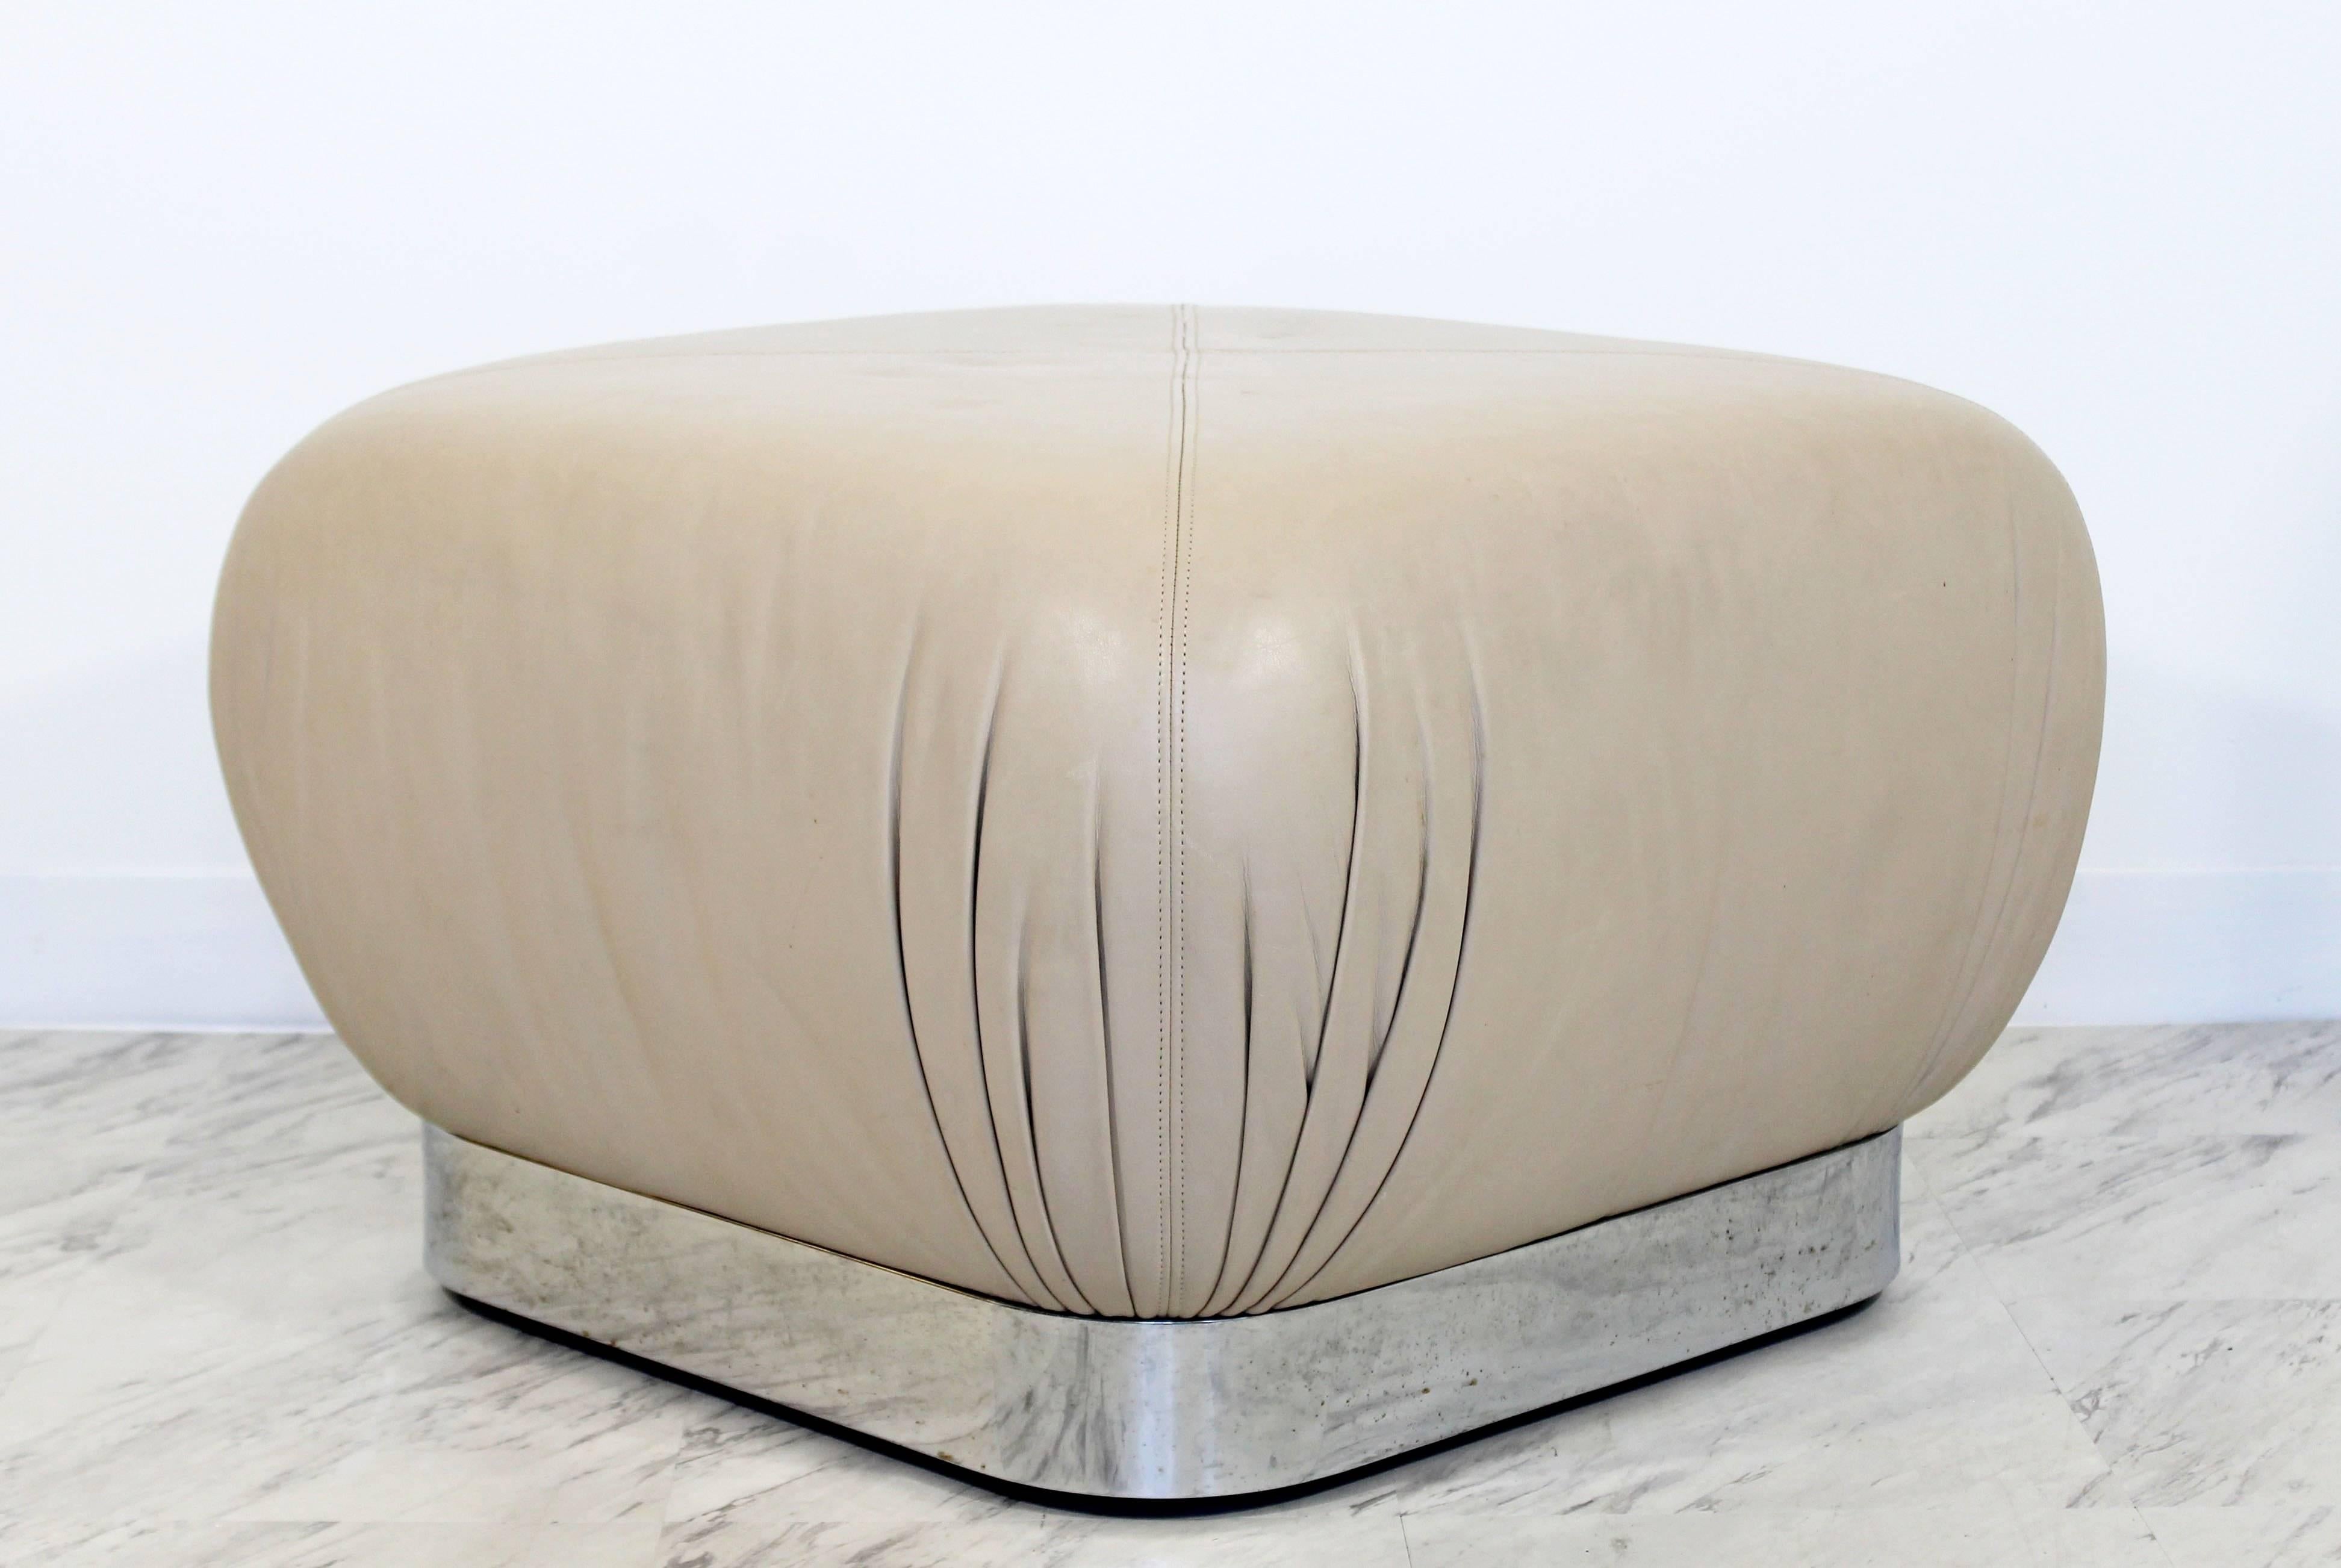 American Mid-Century Modern Preview Chrome Beige Leather Ottoman Pouf Casters Springer